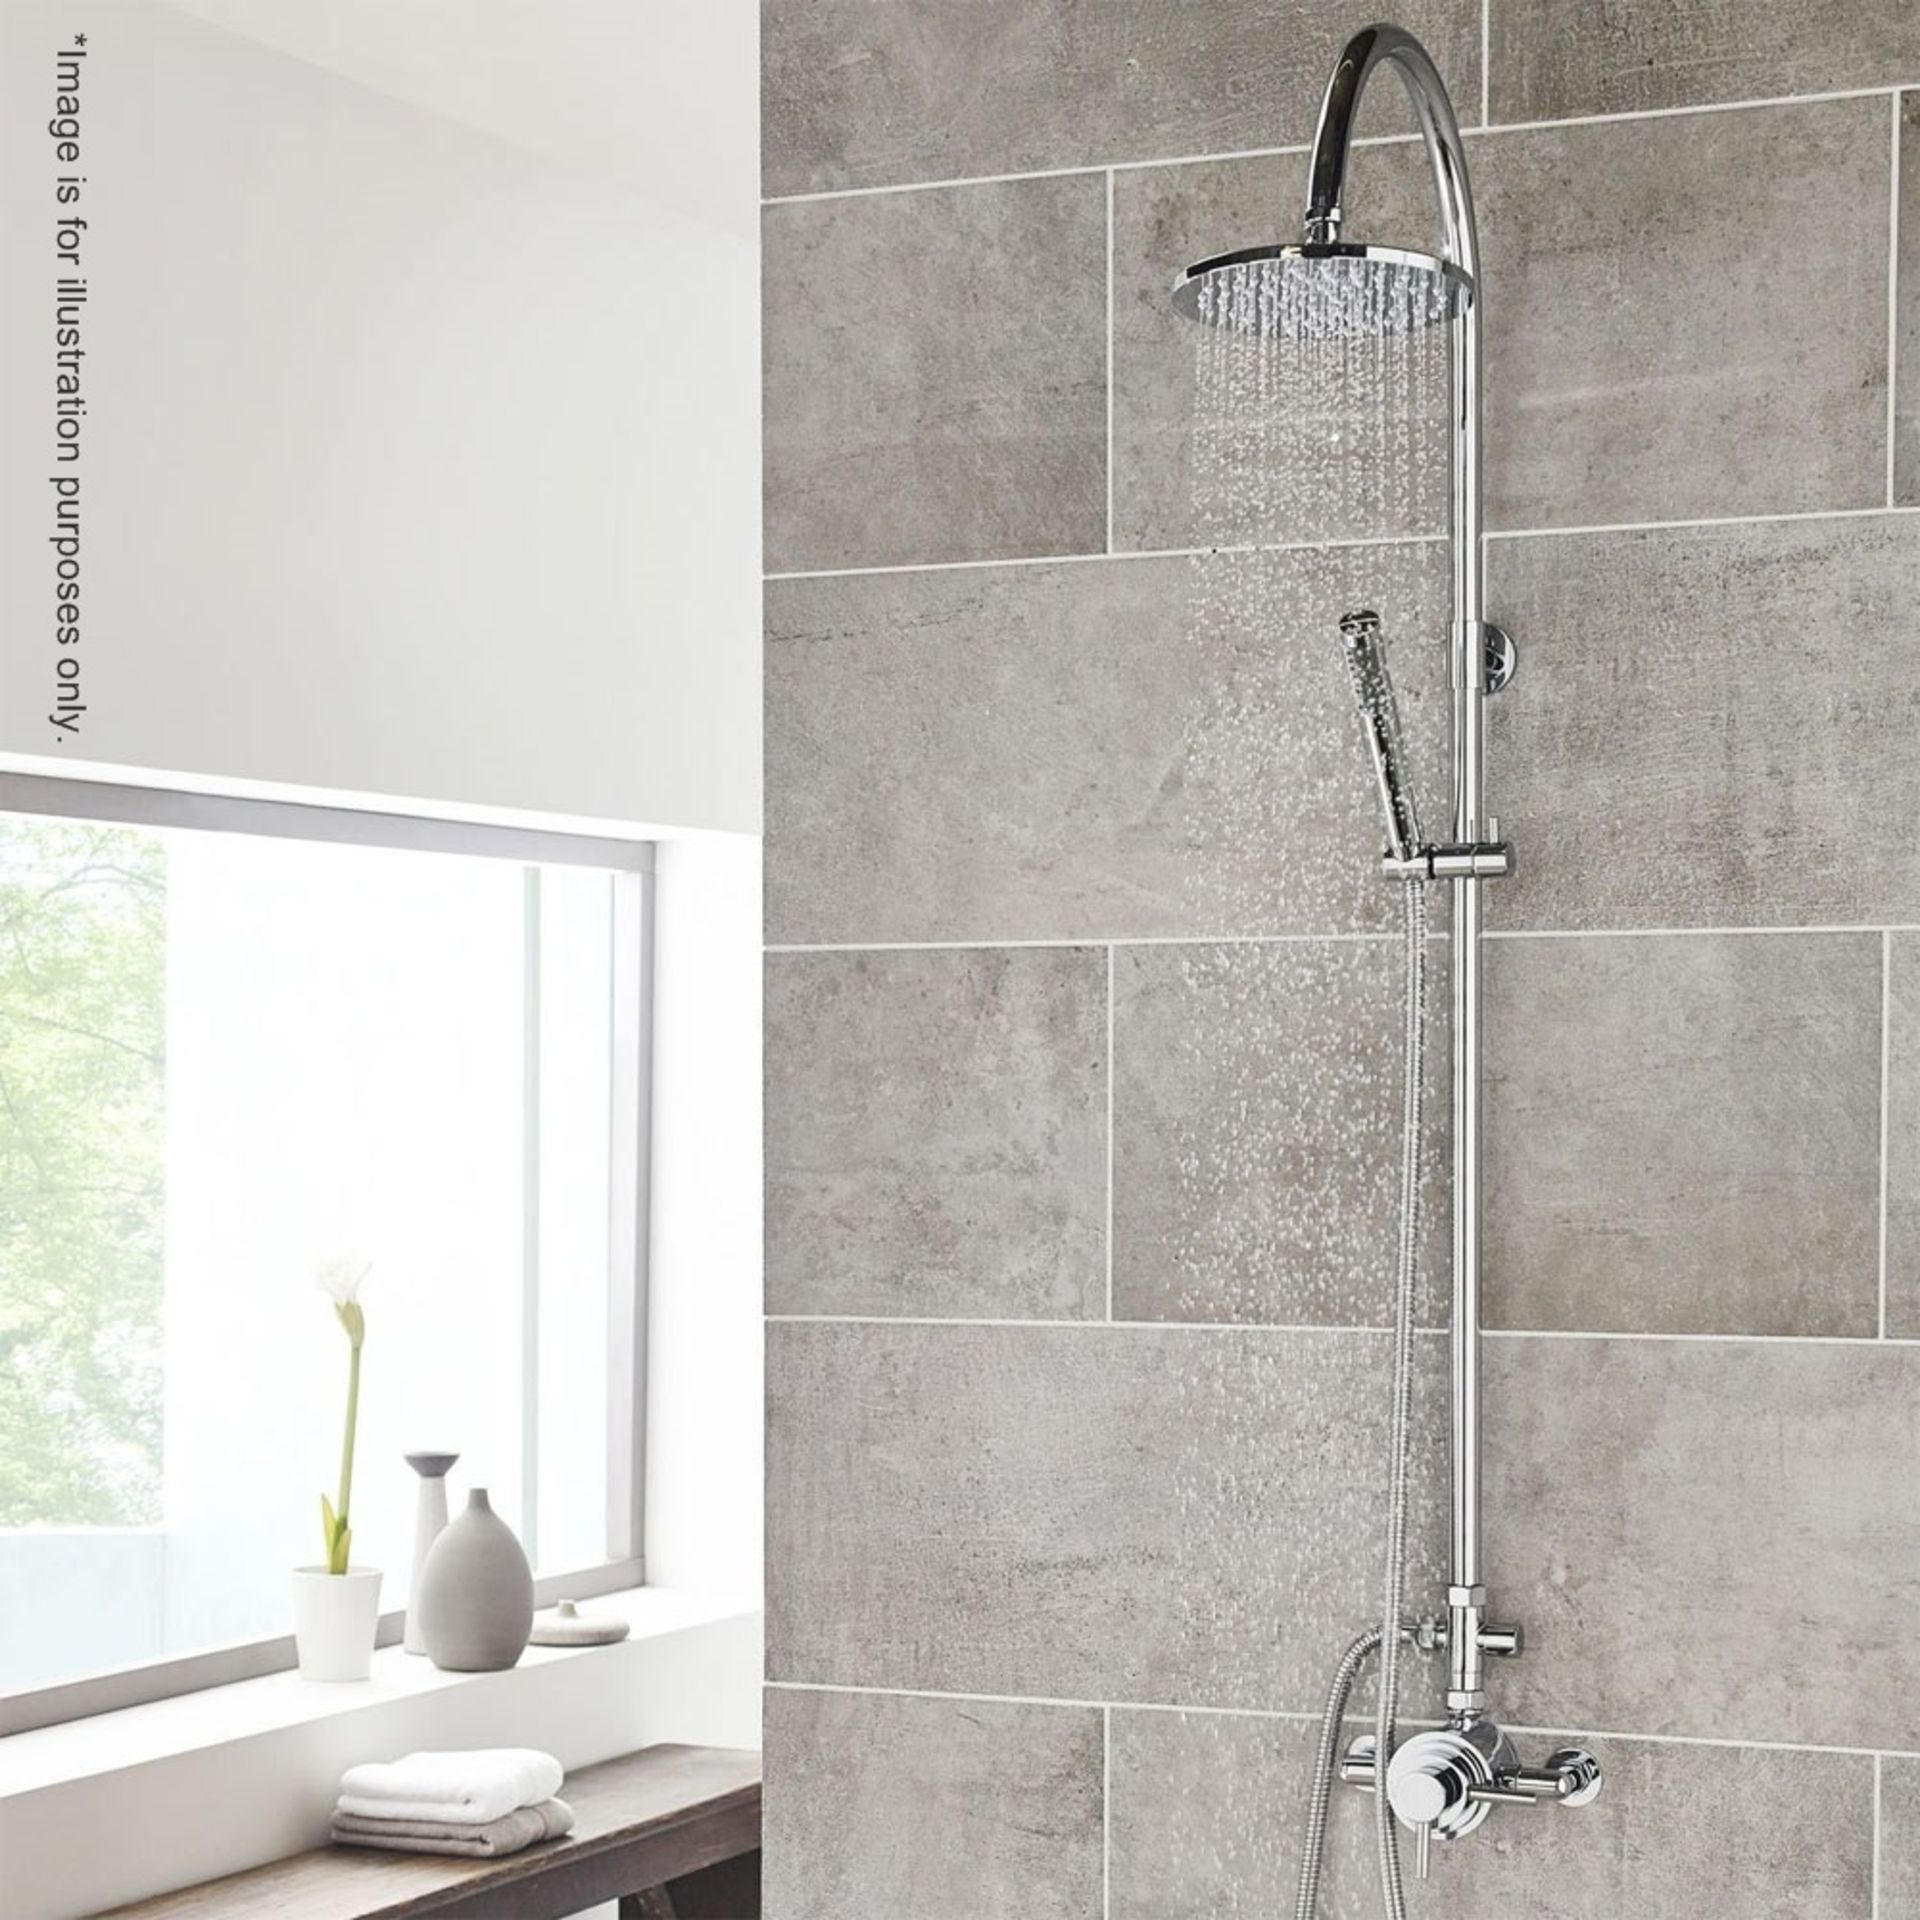 1 x ZEPHYR Shower Kit with Round Head and Minimalist Handset - Chrome - Ref: MBI004 - CL190 - H116 x